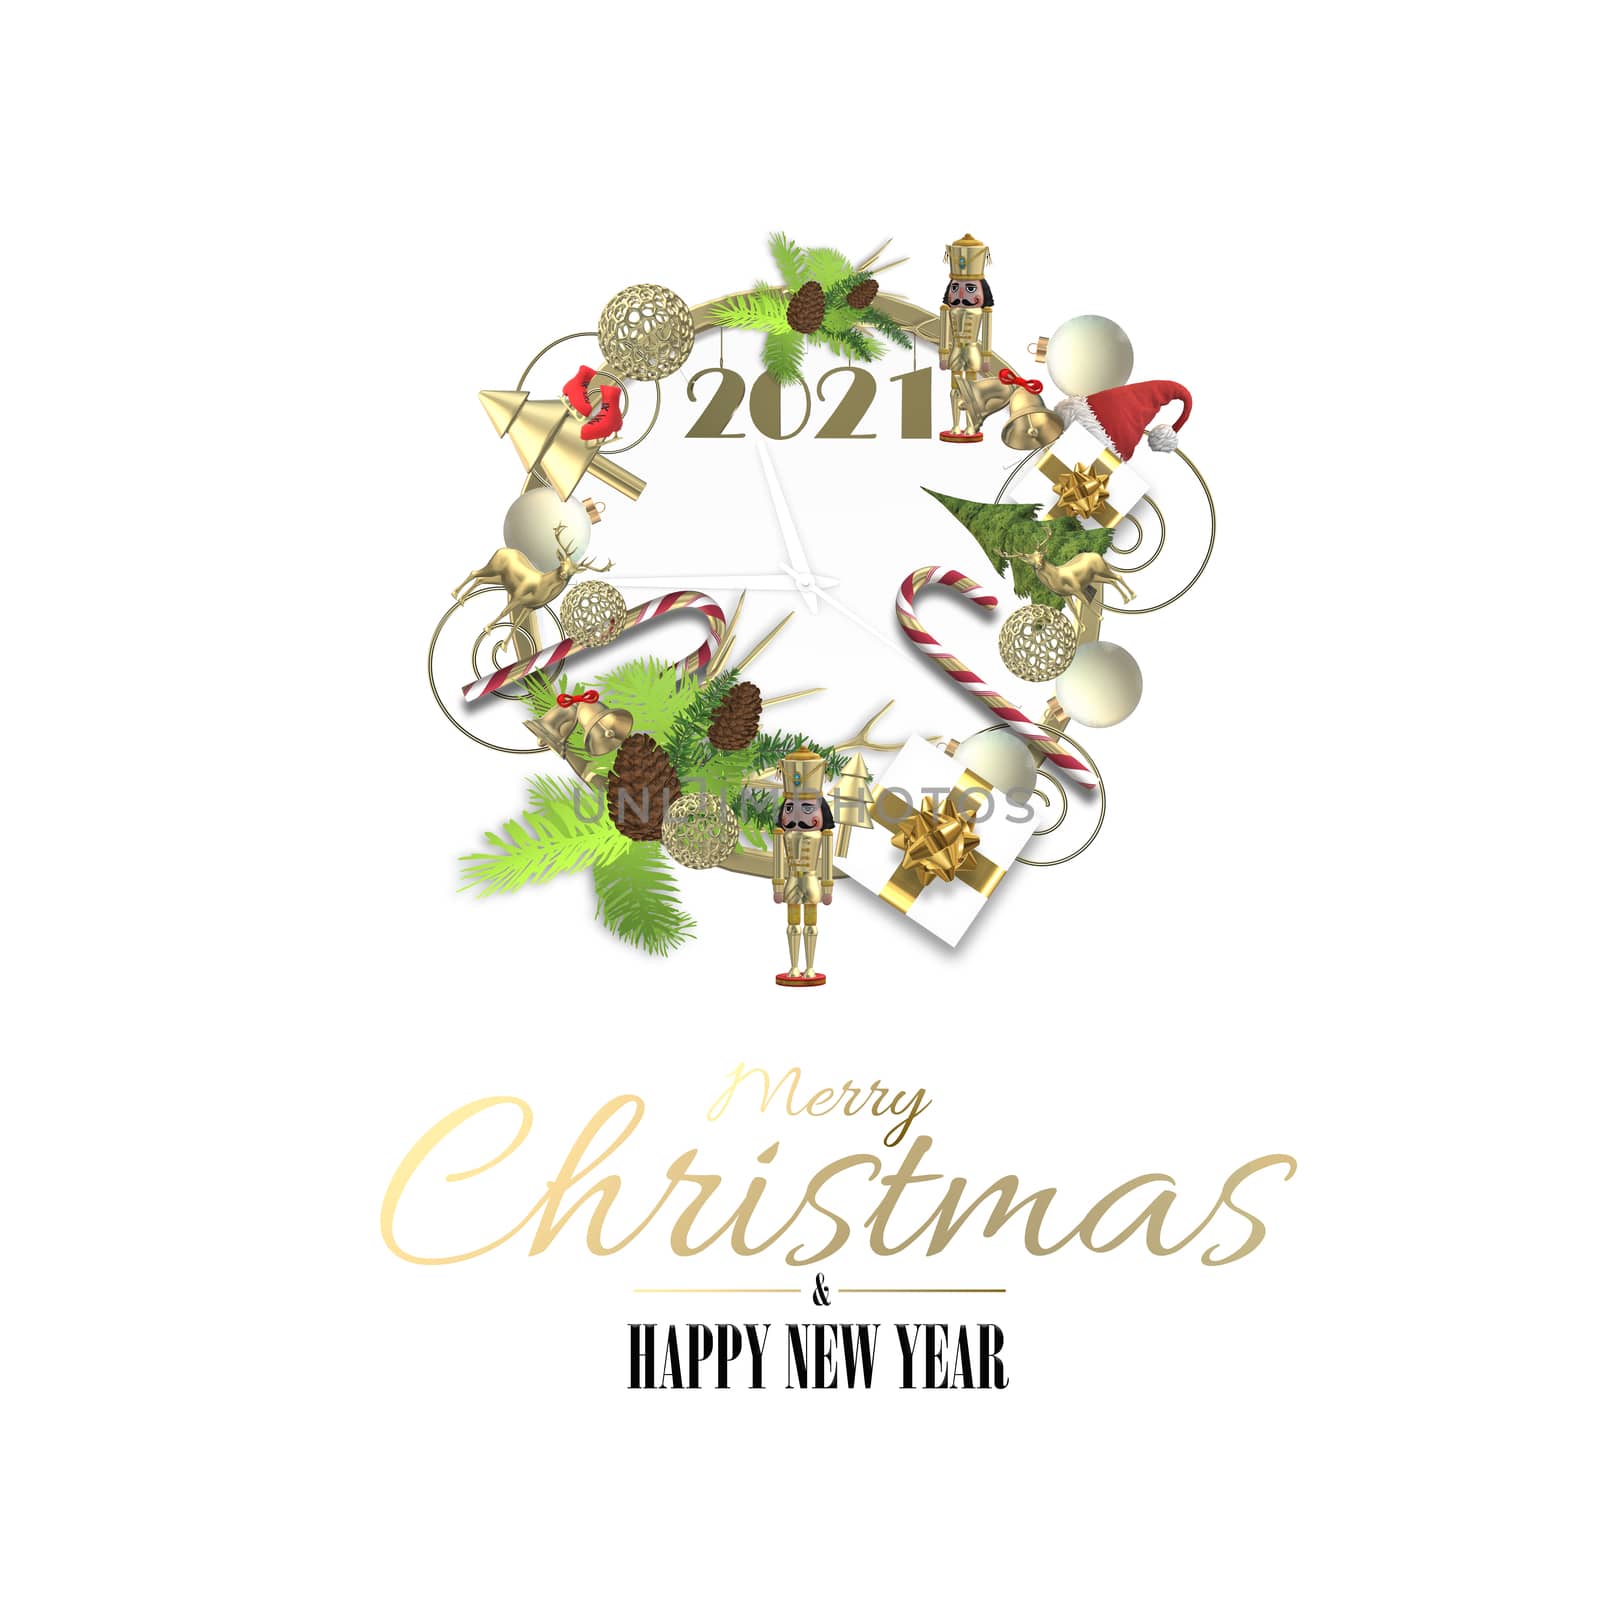 Christmas design with Xmas symbols and digit 2021 on white background. Set of Xmas symbols in gold red colours over white. Golden text Merry Christmas Happy New year. 3D illustration